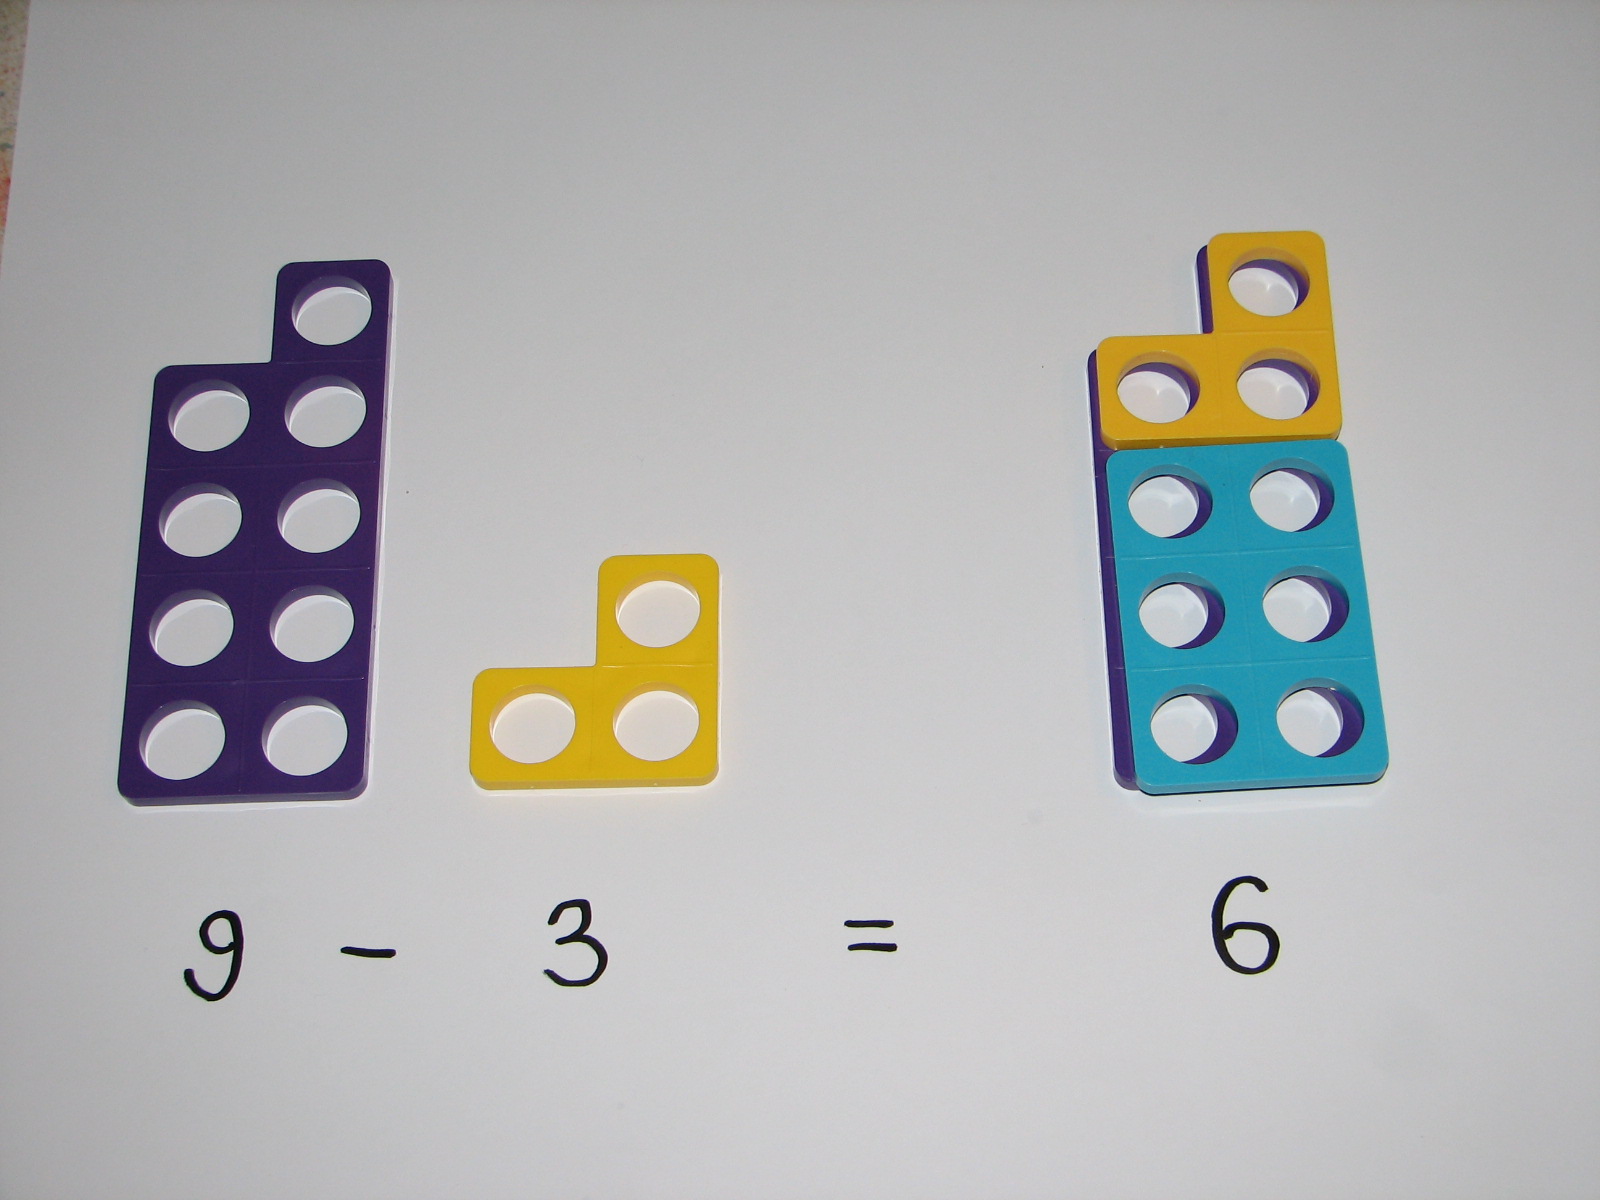 What elements are acquired with Numicon?